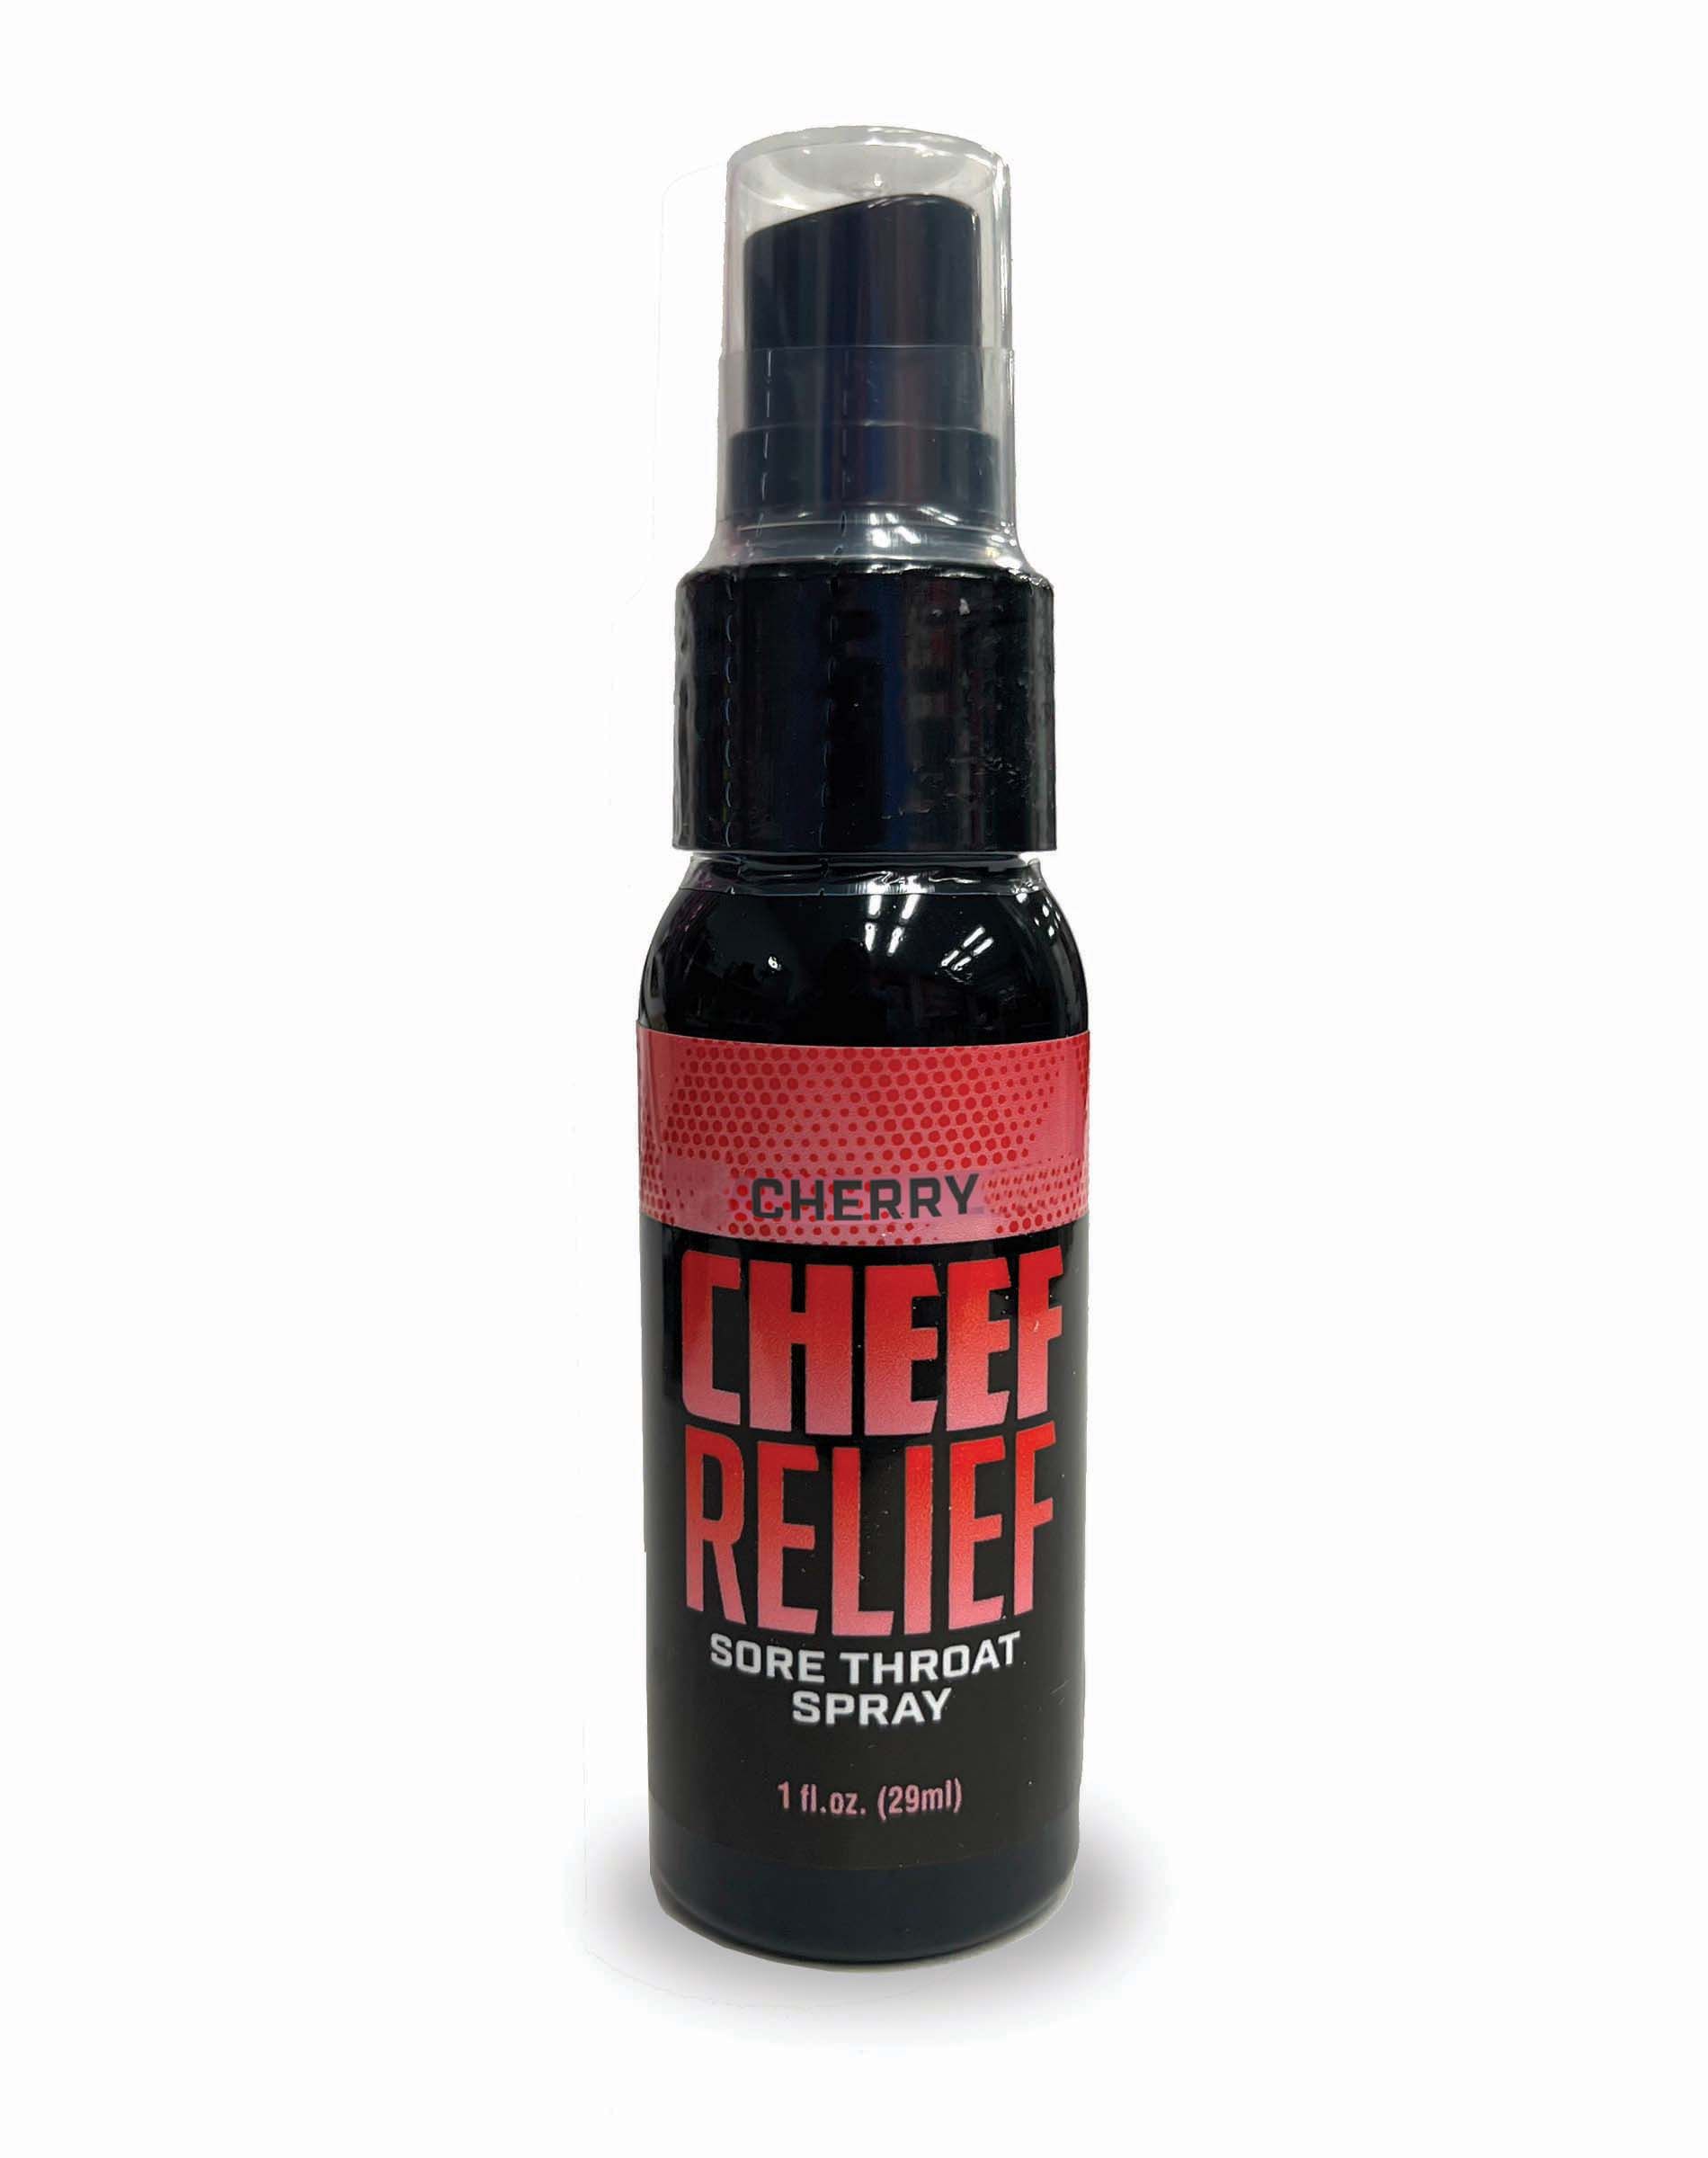 CHEEF RELIEF CHERRY - Click Image to Close